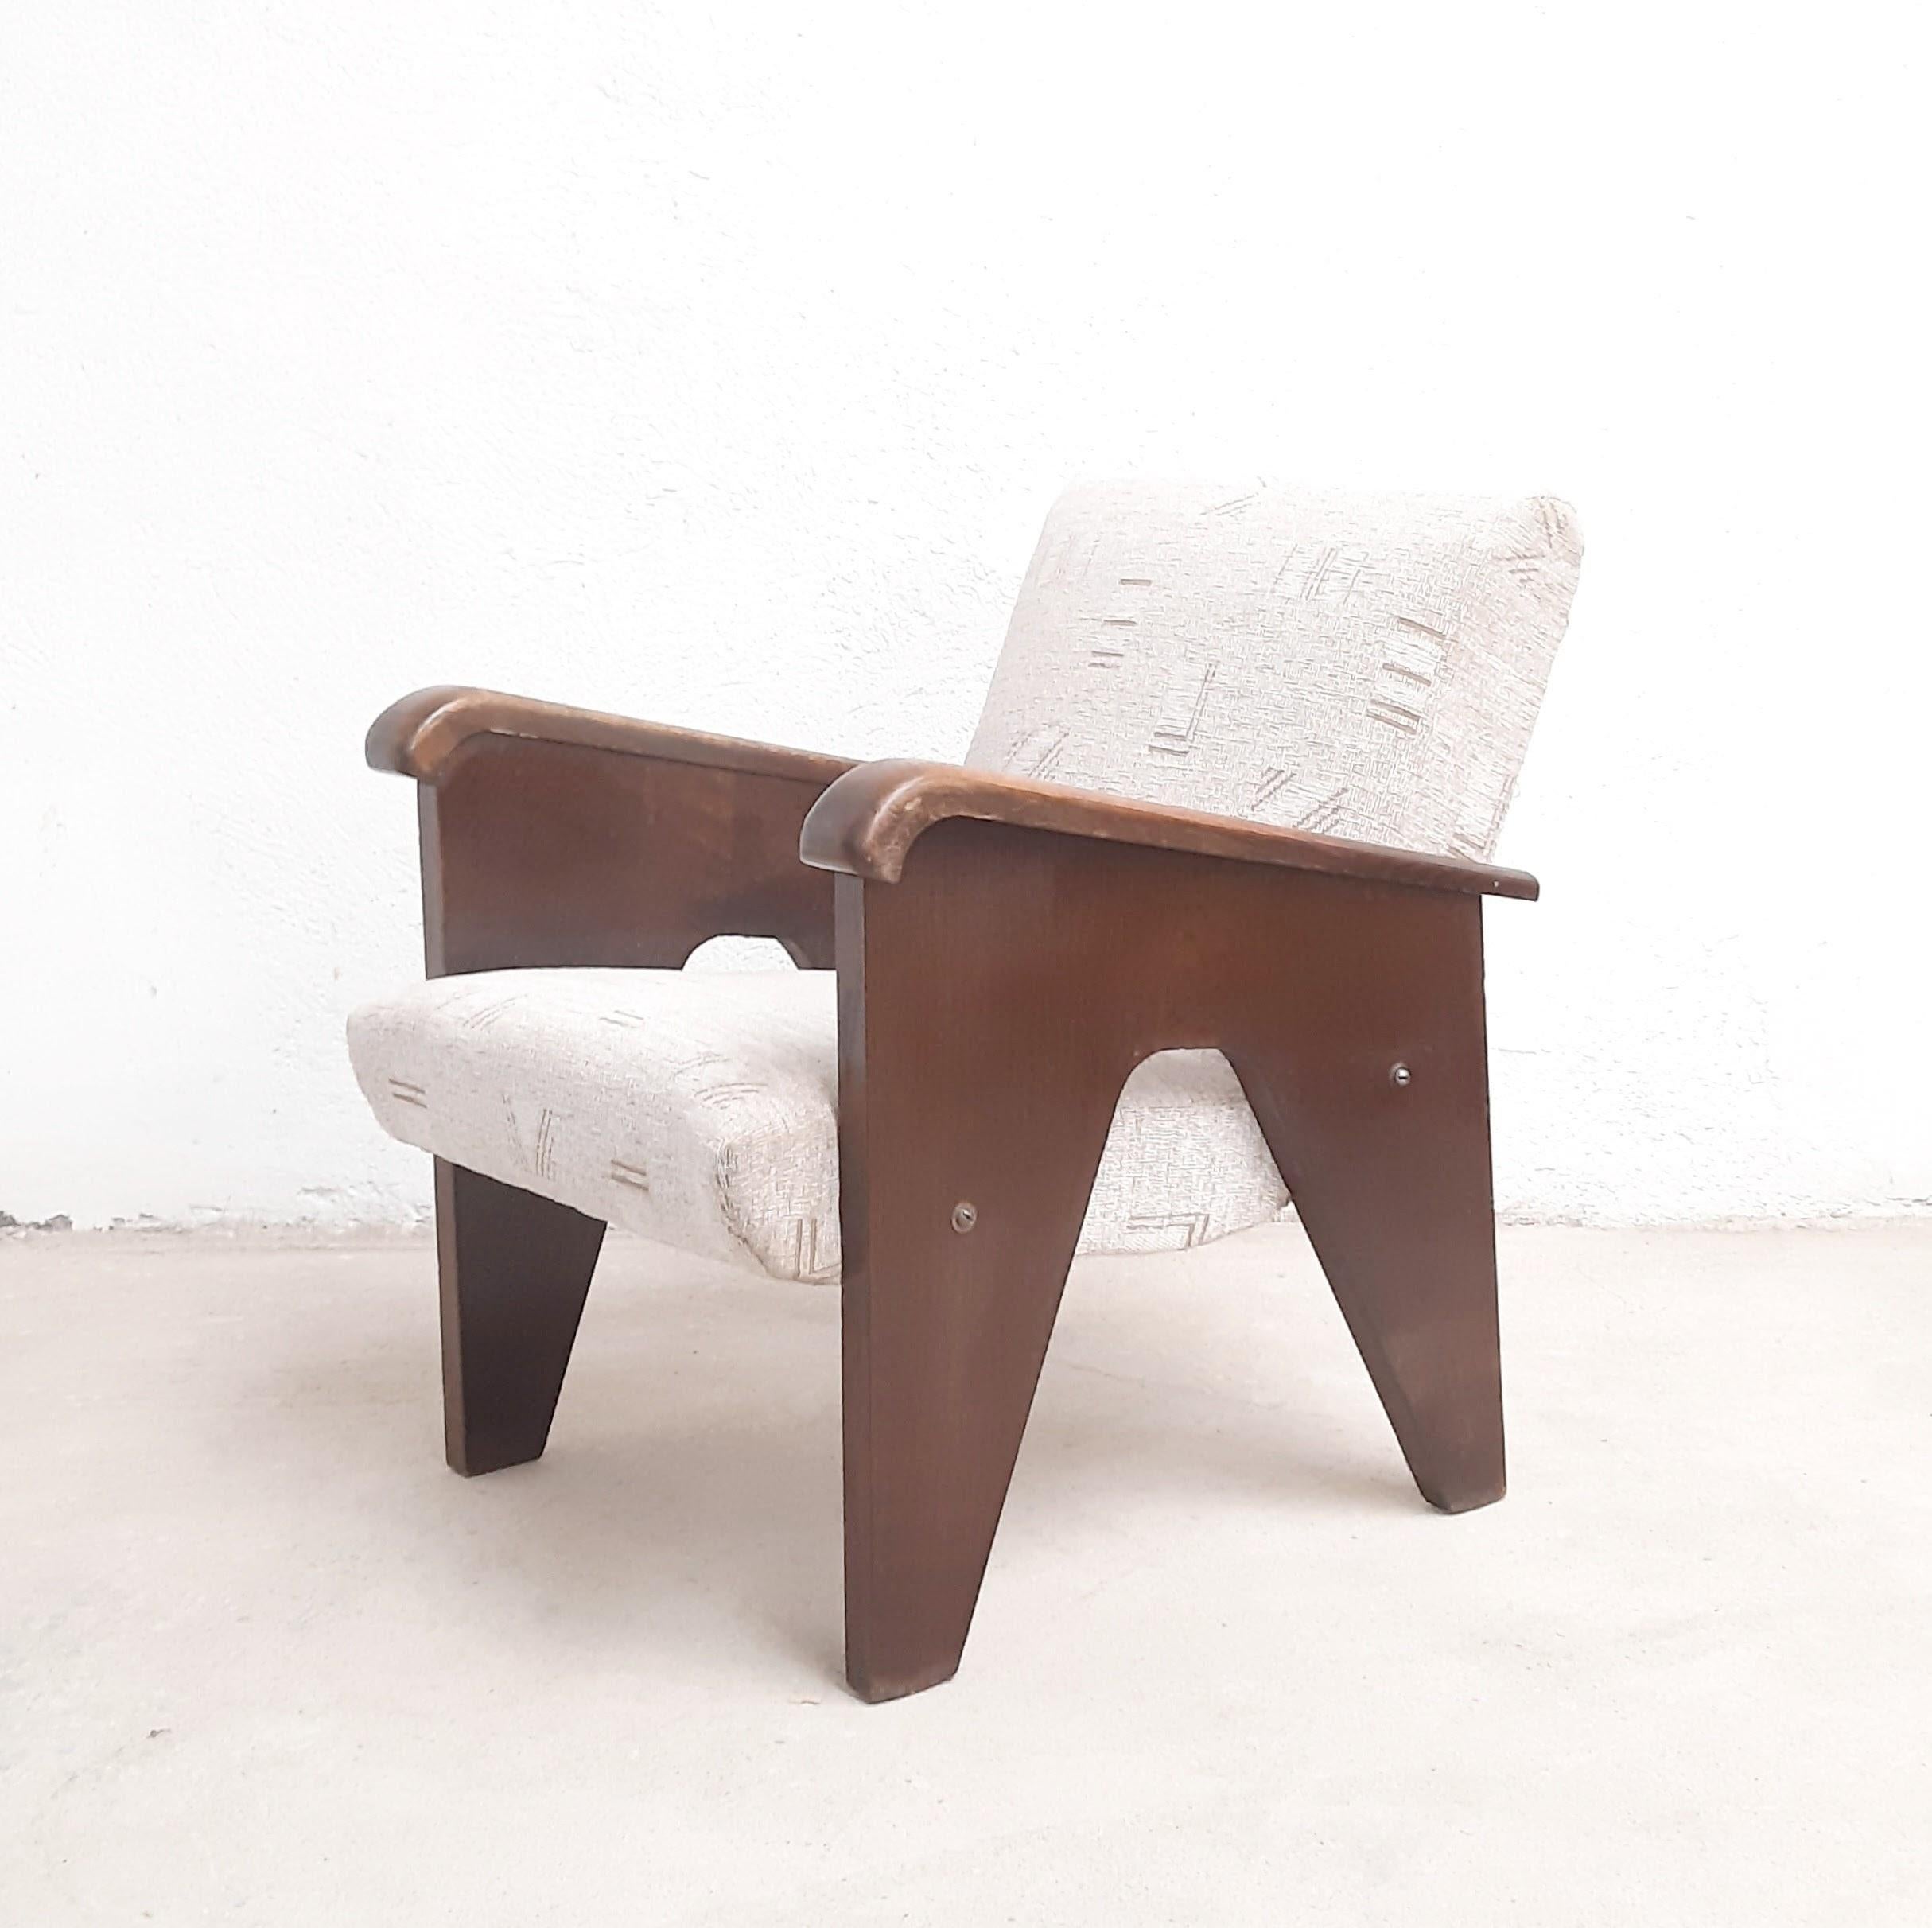 Unique armchair manufactured by UP Závody, home to famous Czech architect Jindrich Halabala, in late 40s / early 50s. Design attributed to Jan Vanek. Wooden structure in good original condition, previously reupholstered.